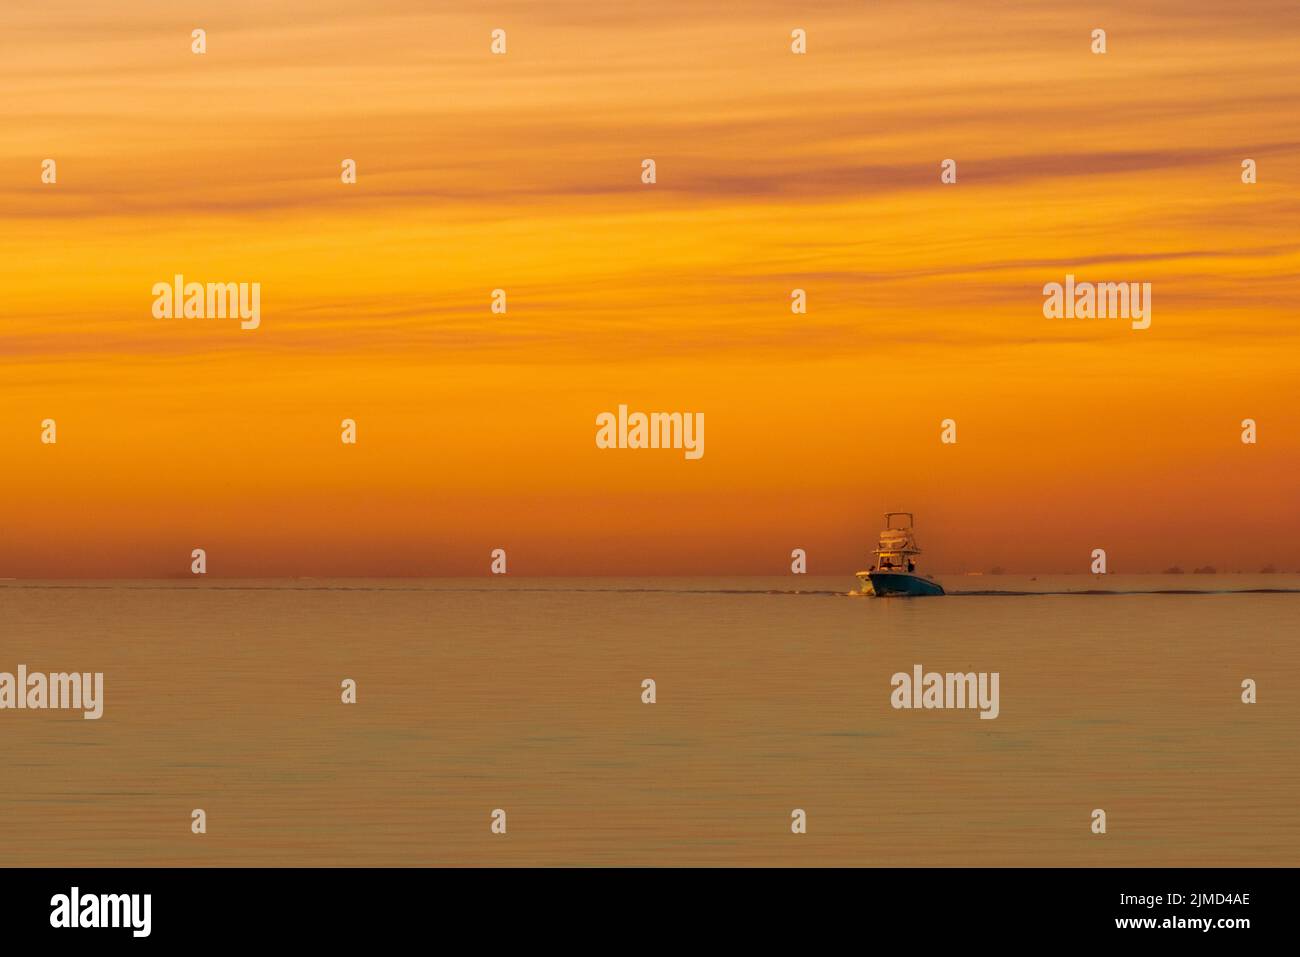 A fishing boat crosses Mobile Bay near Fairhope, Alabama, at sunset in a composite image. Stock Photo